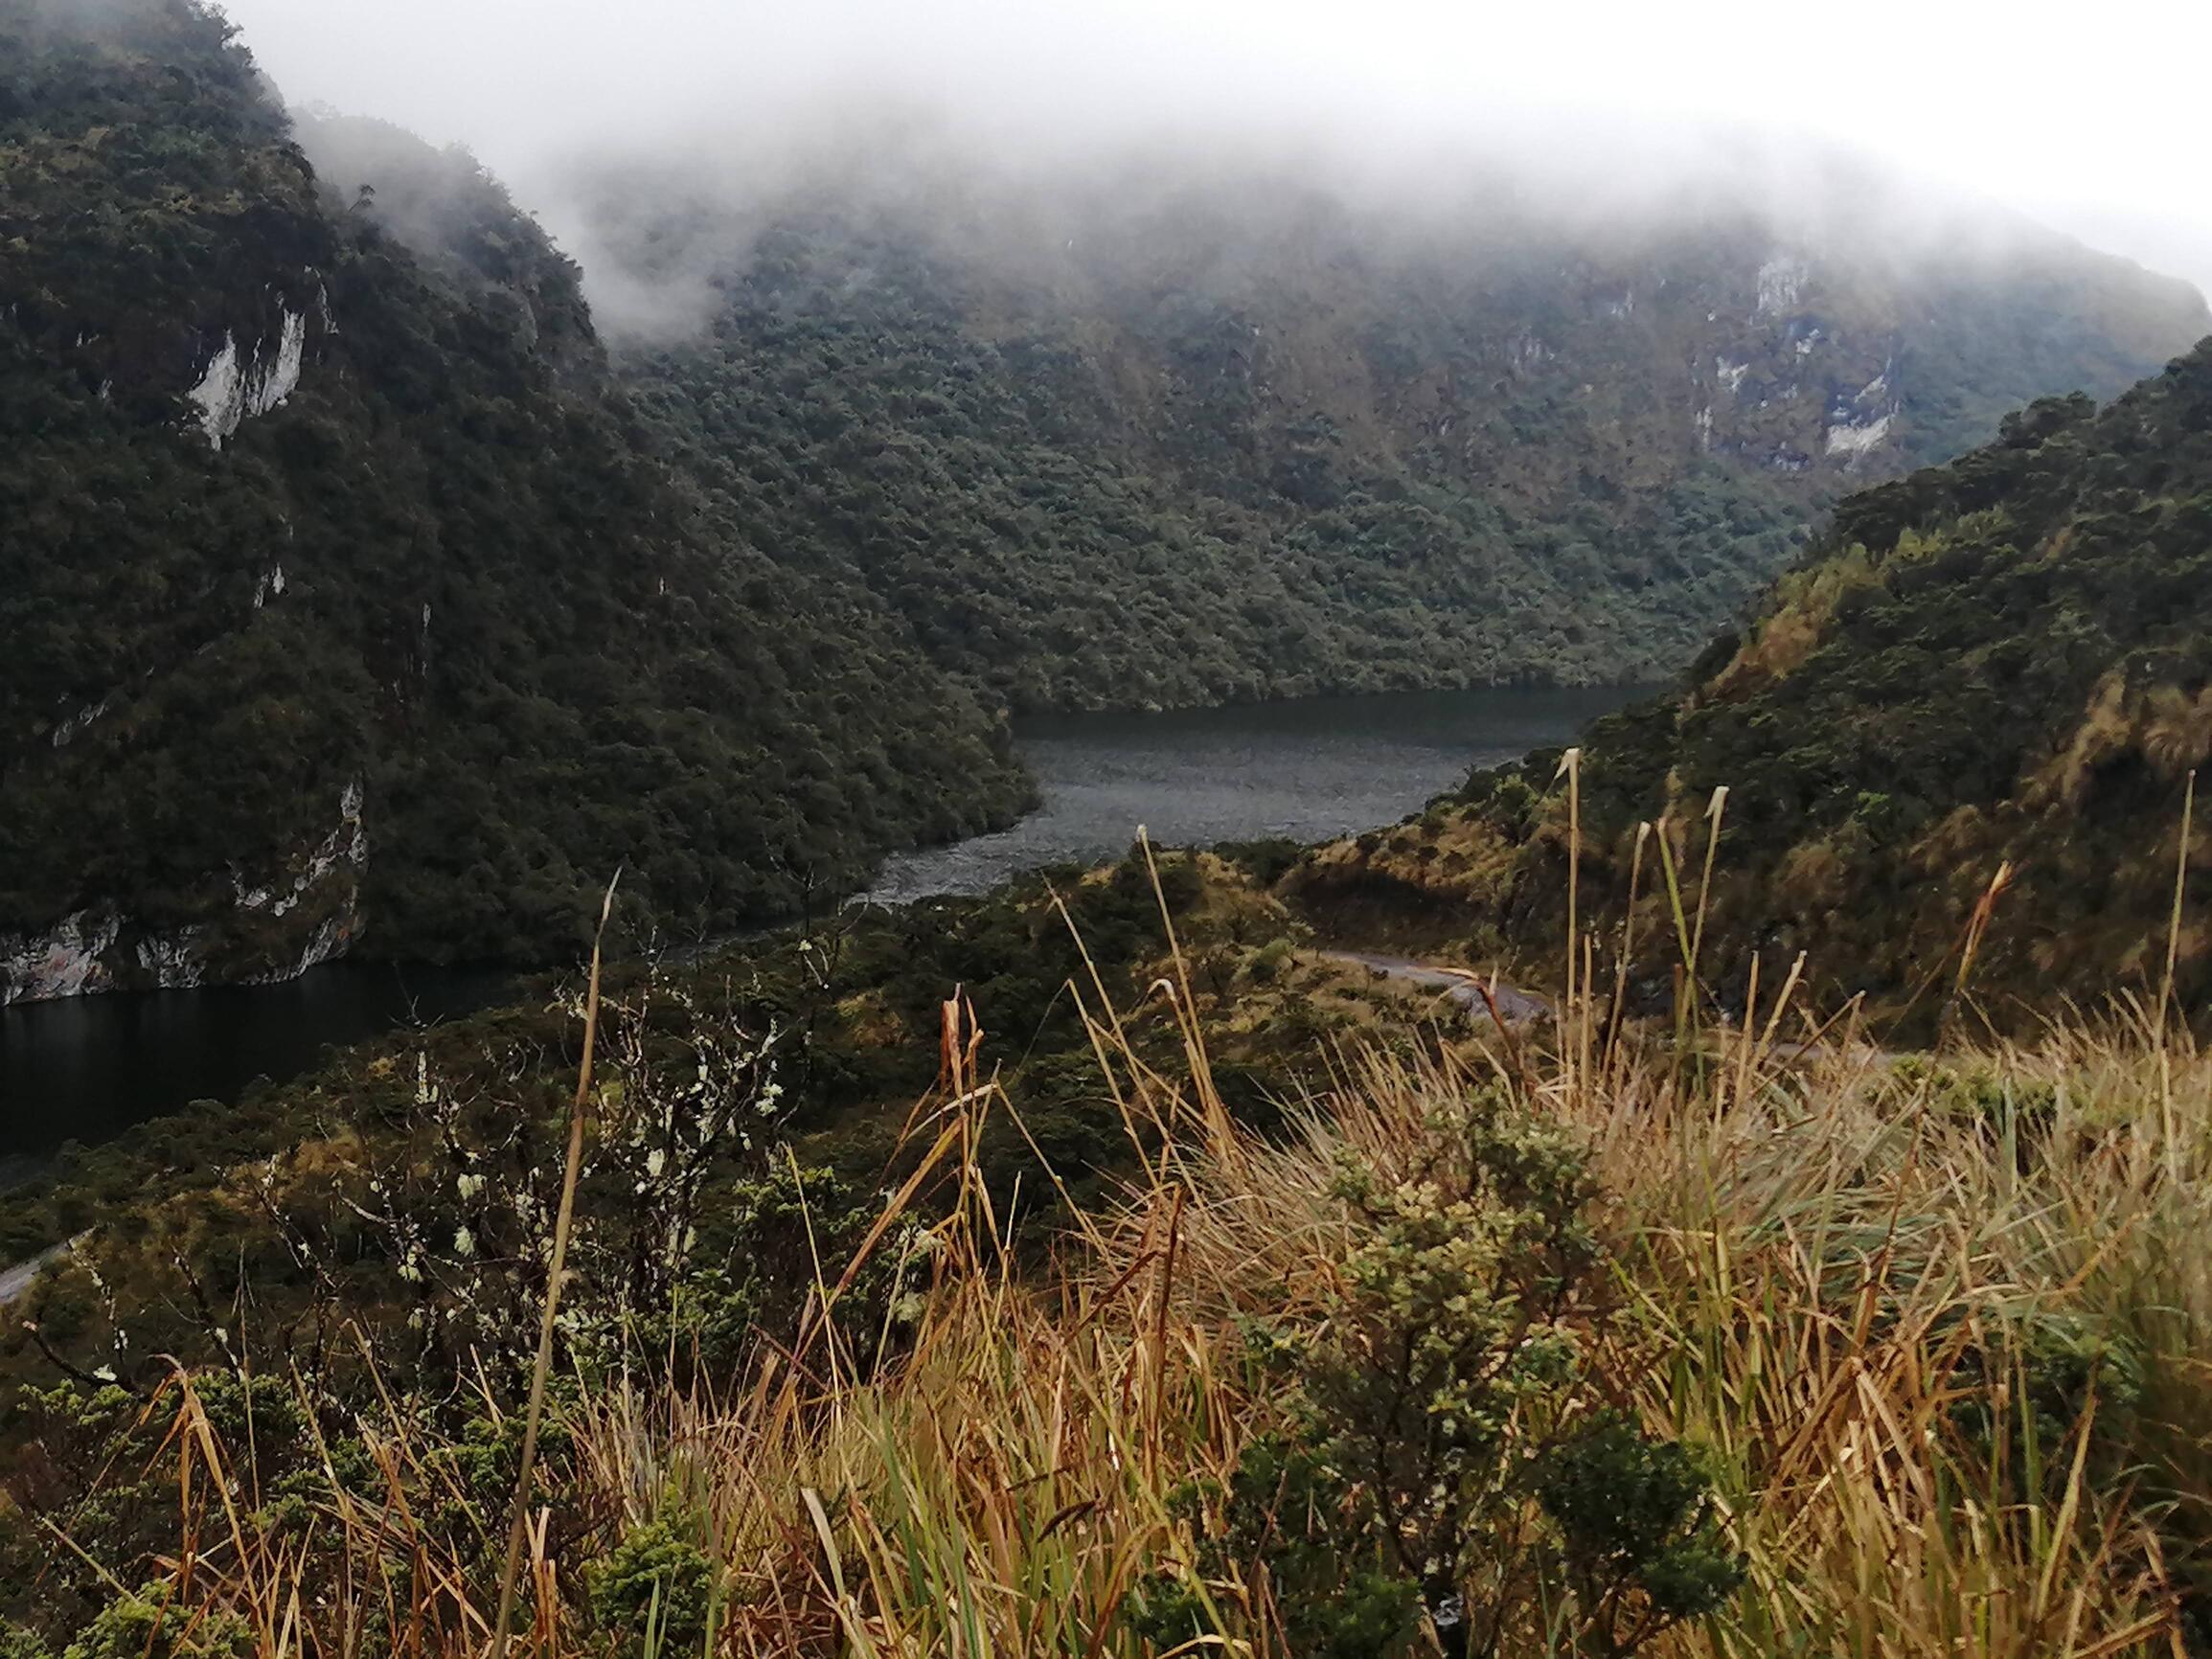 Impressions of the area between Oyavachi and Papallacta, Ecuador. Part of the Coca Cayambe national park. 